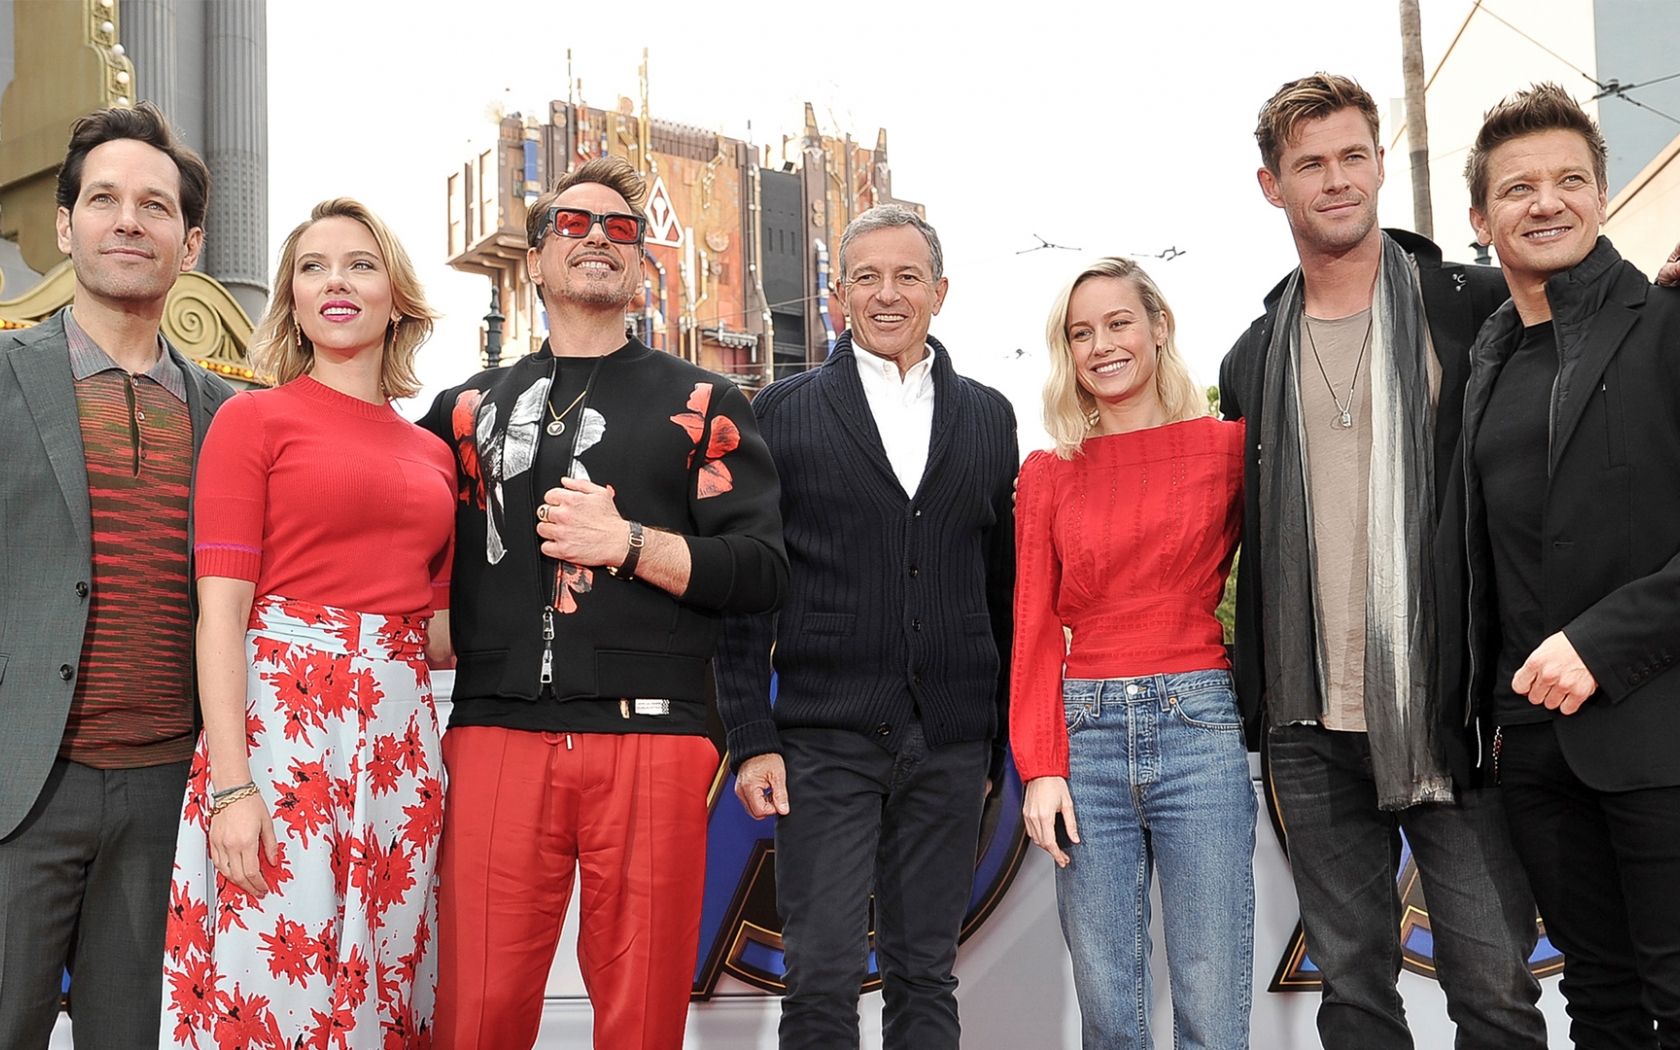 Free download The Avengers Endgame Cast Just Surprised Kids At.